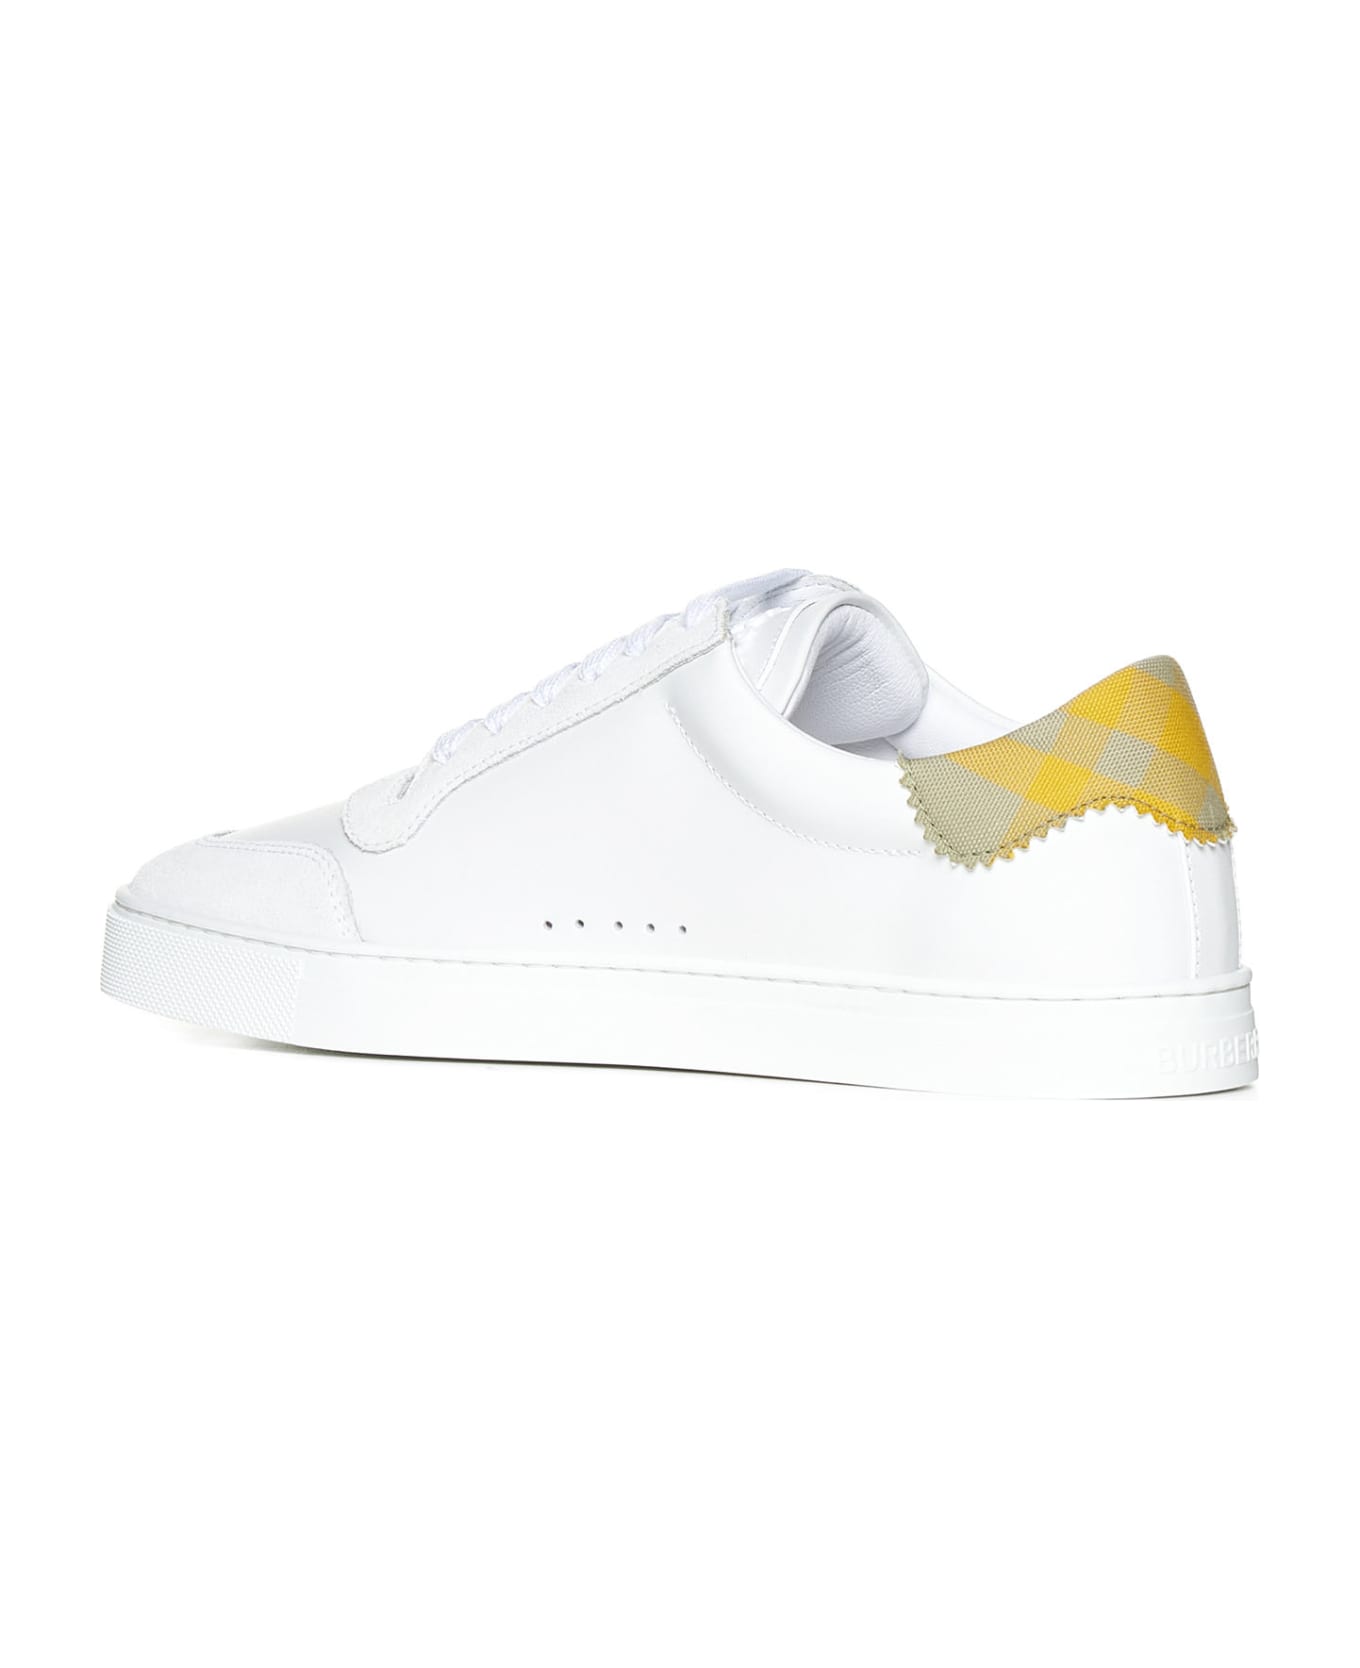 Burberry White Leather Check Sneakers - Op white